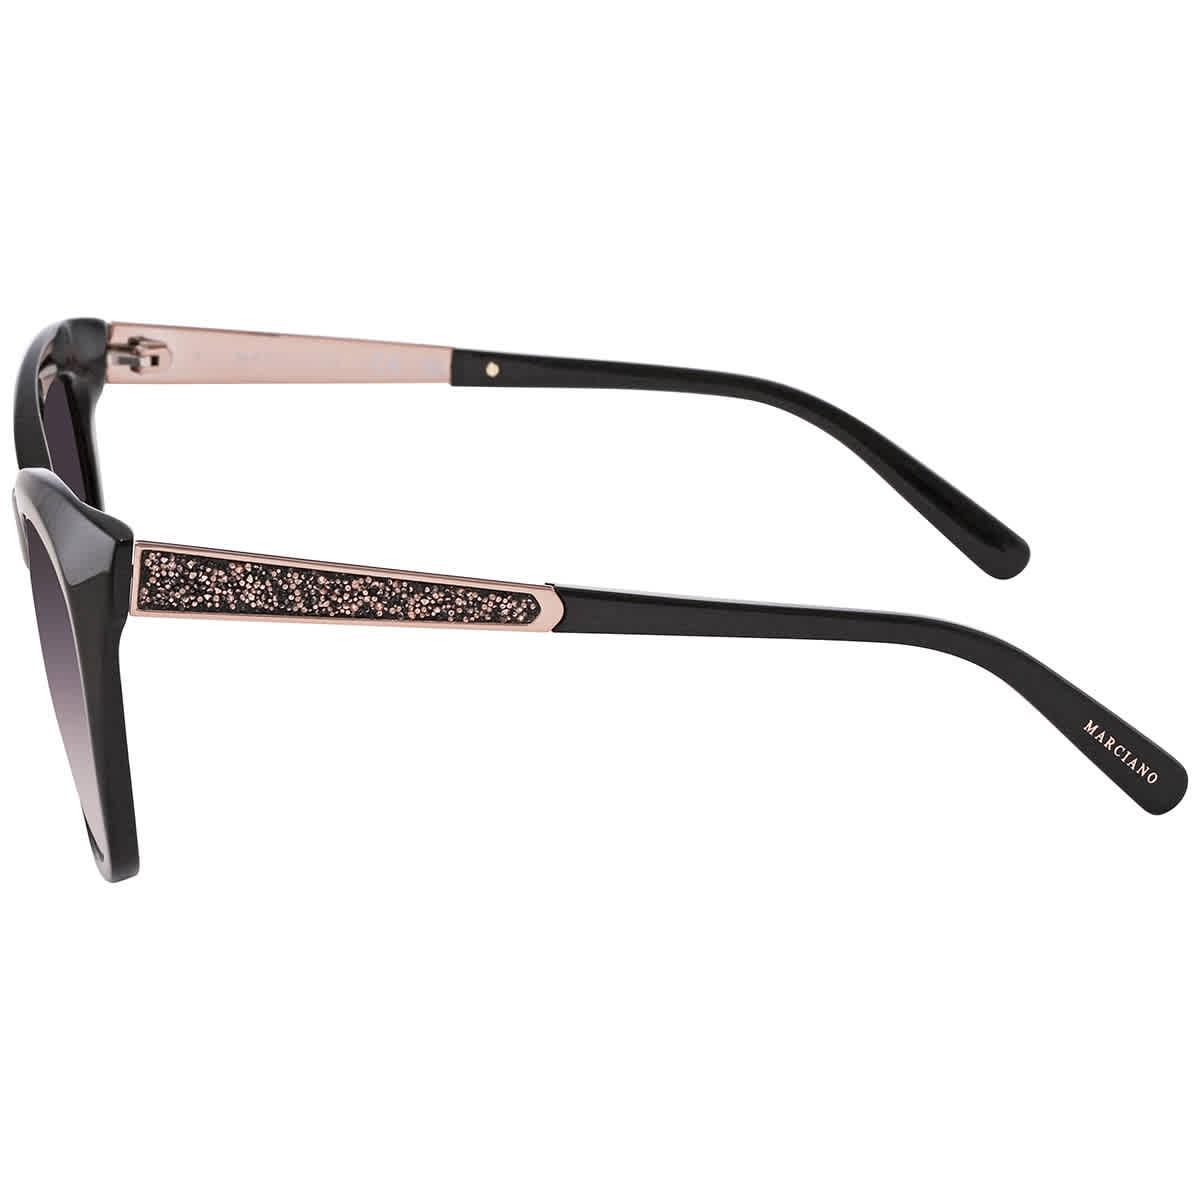 Guess Gradient Or Mirror Violet Cat Eye Sunglasses in Black | Lyst